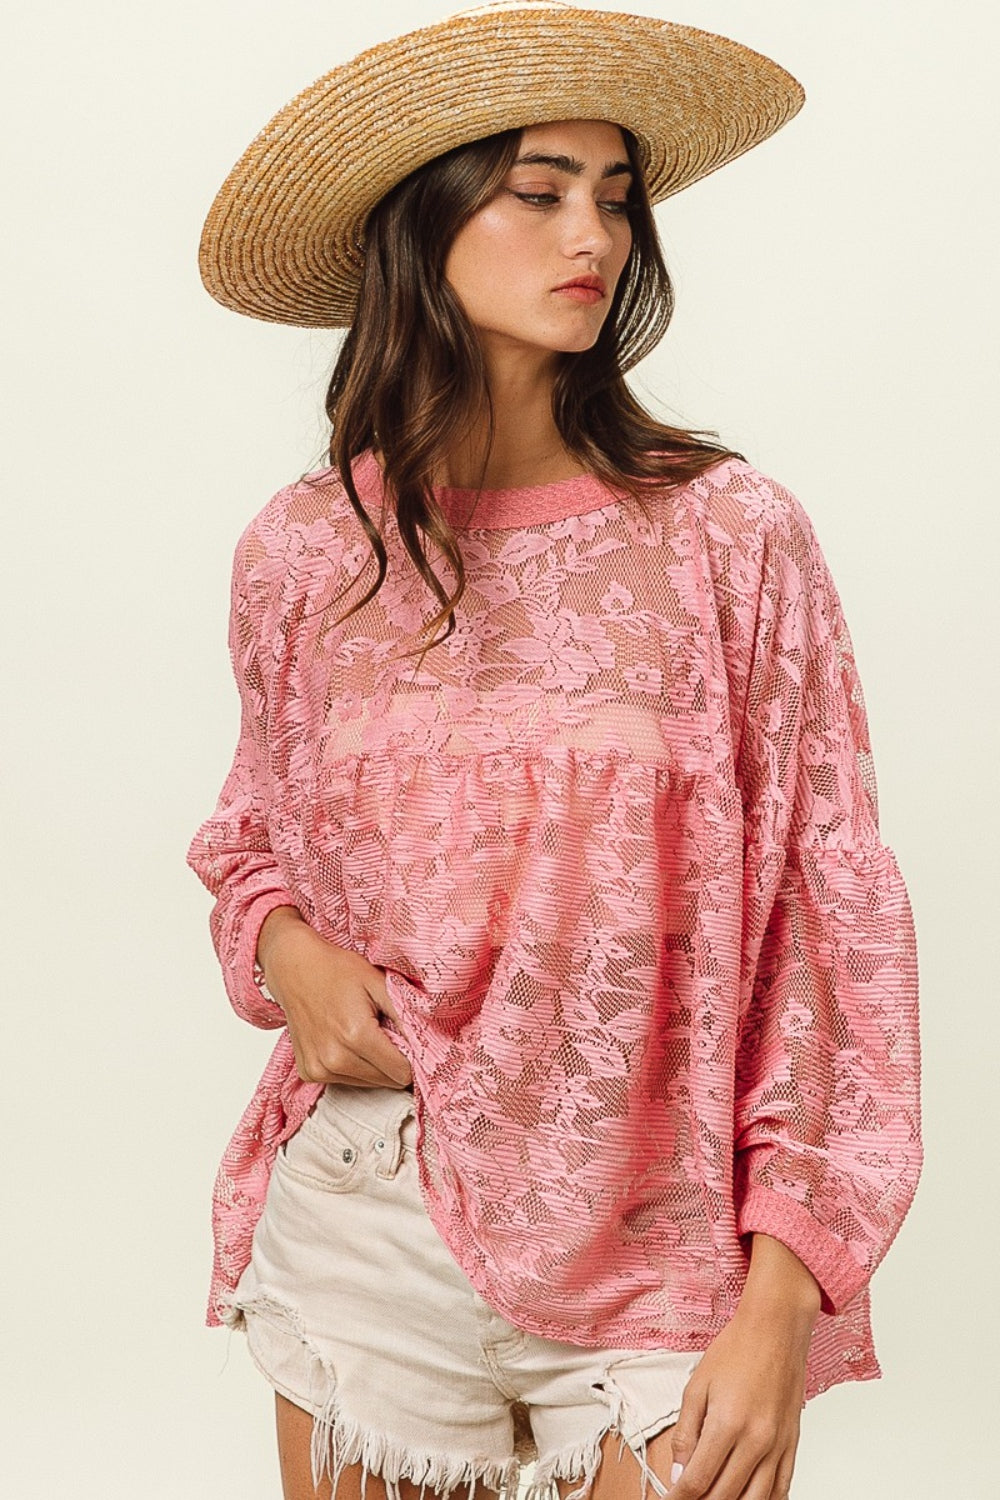 The Floral Lace Long Sleeve Top is a romantic and elegant piece that adds a touch of femininity to your wardrobe. Featuring delicate floral lace detailing, this top exudes a sophisticated and timeless charm. With long sleeves, it is perfect for transitioning between seasons with style.  S - XL